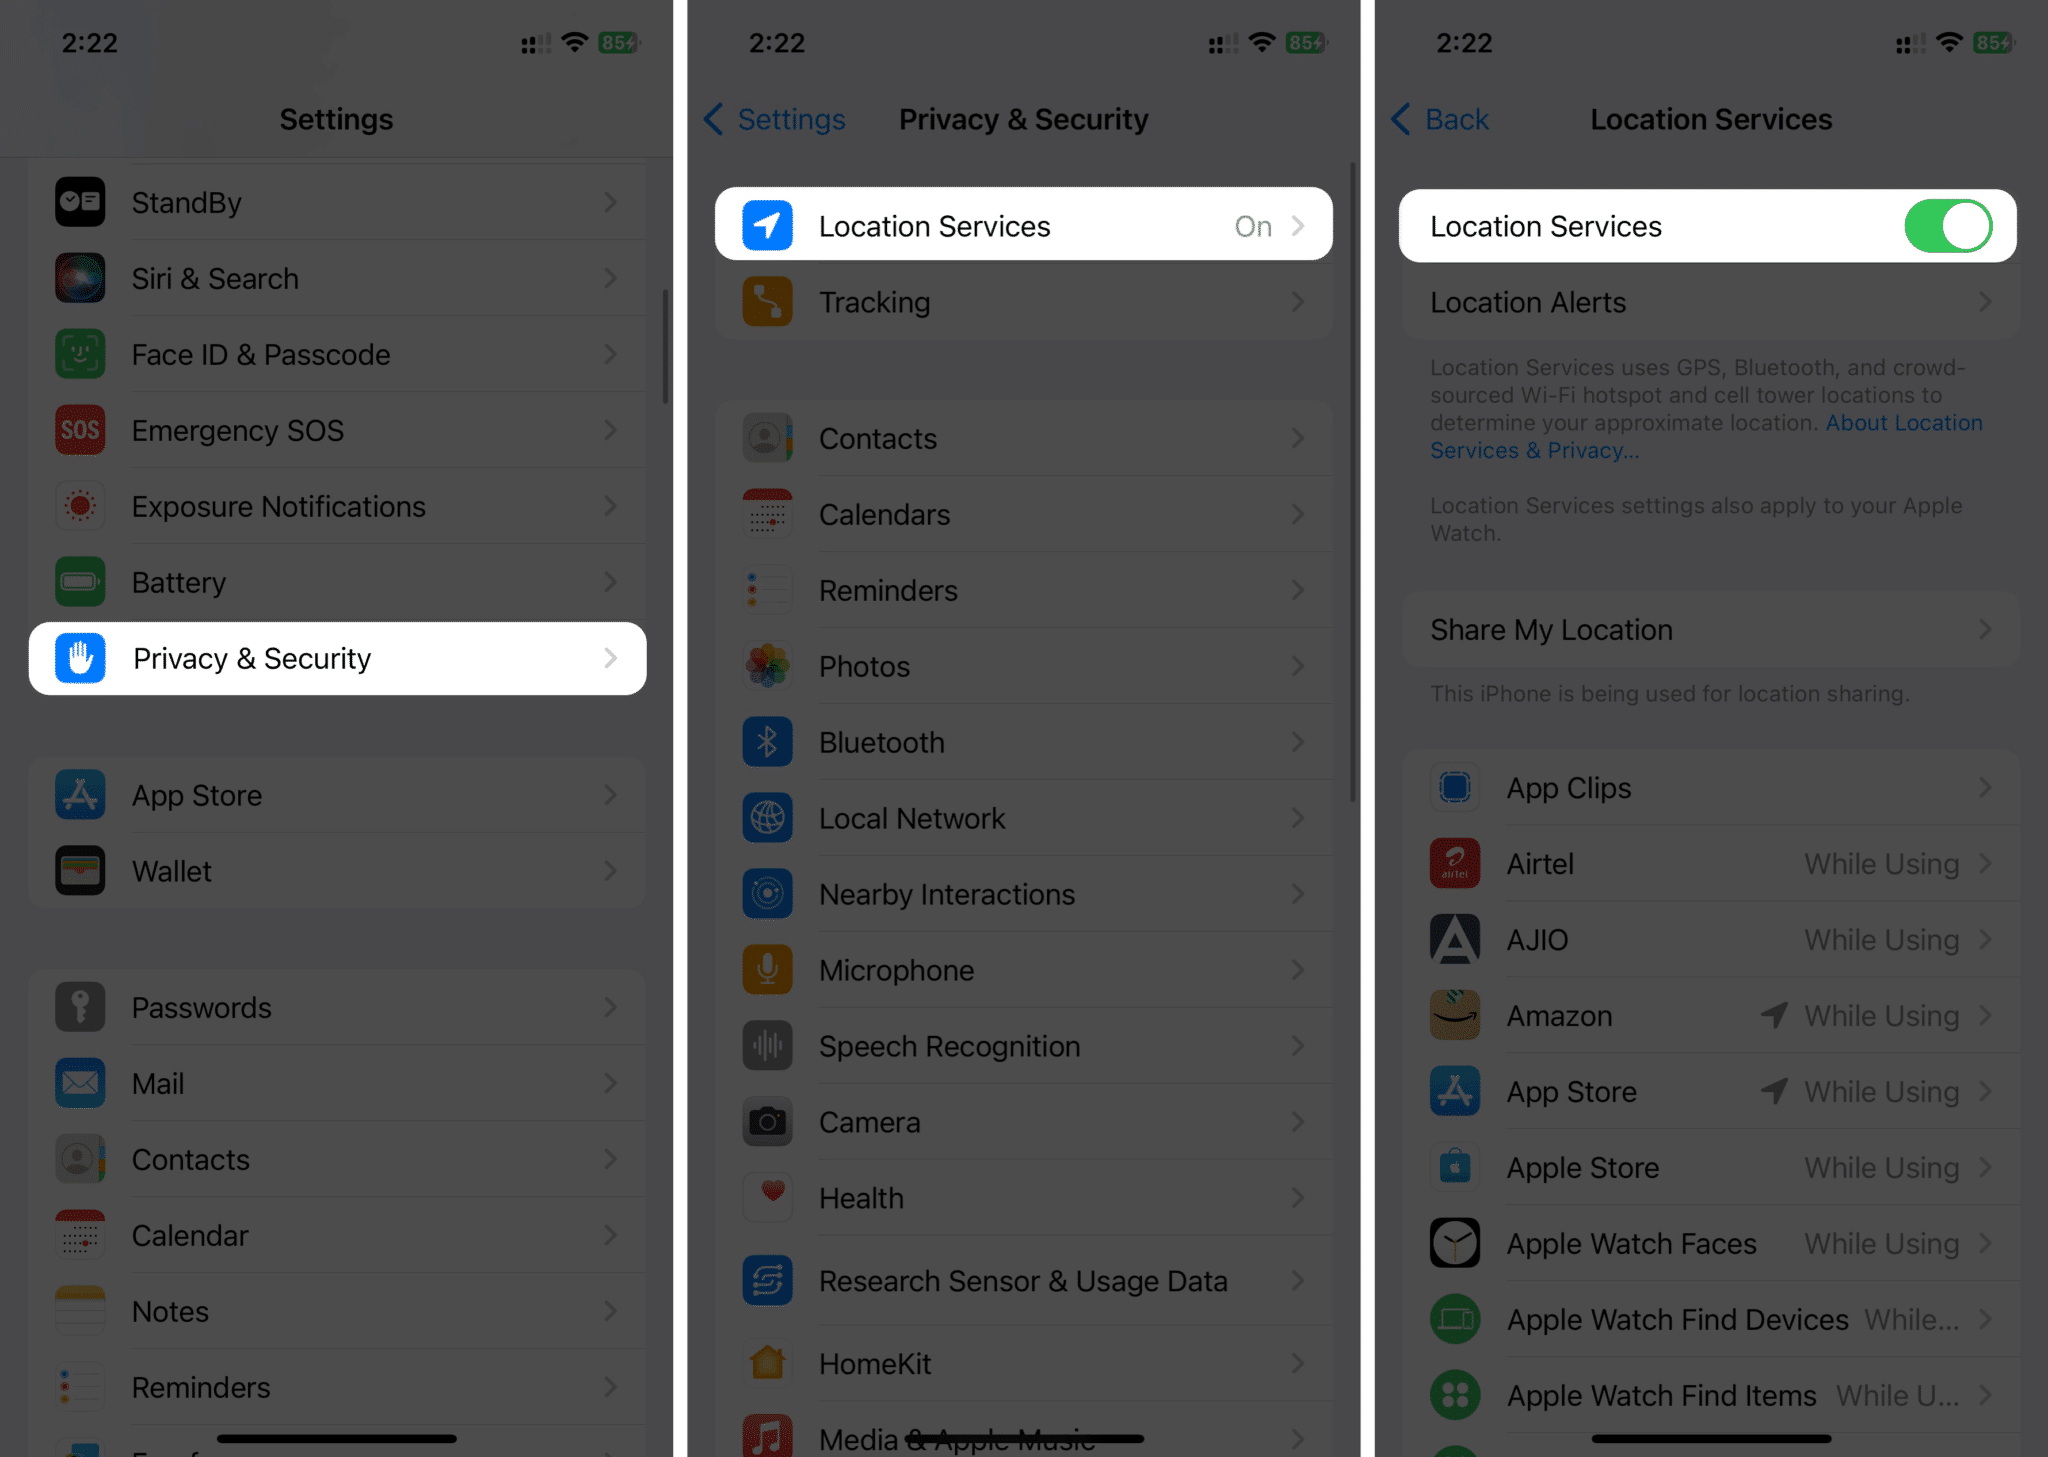 Enabling Location Services in iOS Settings